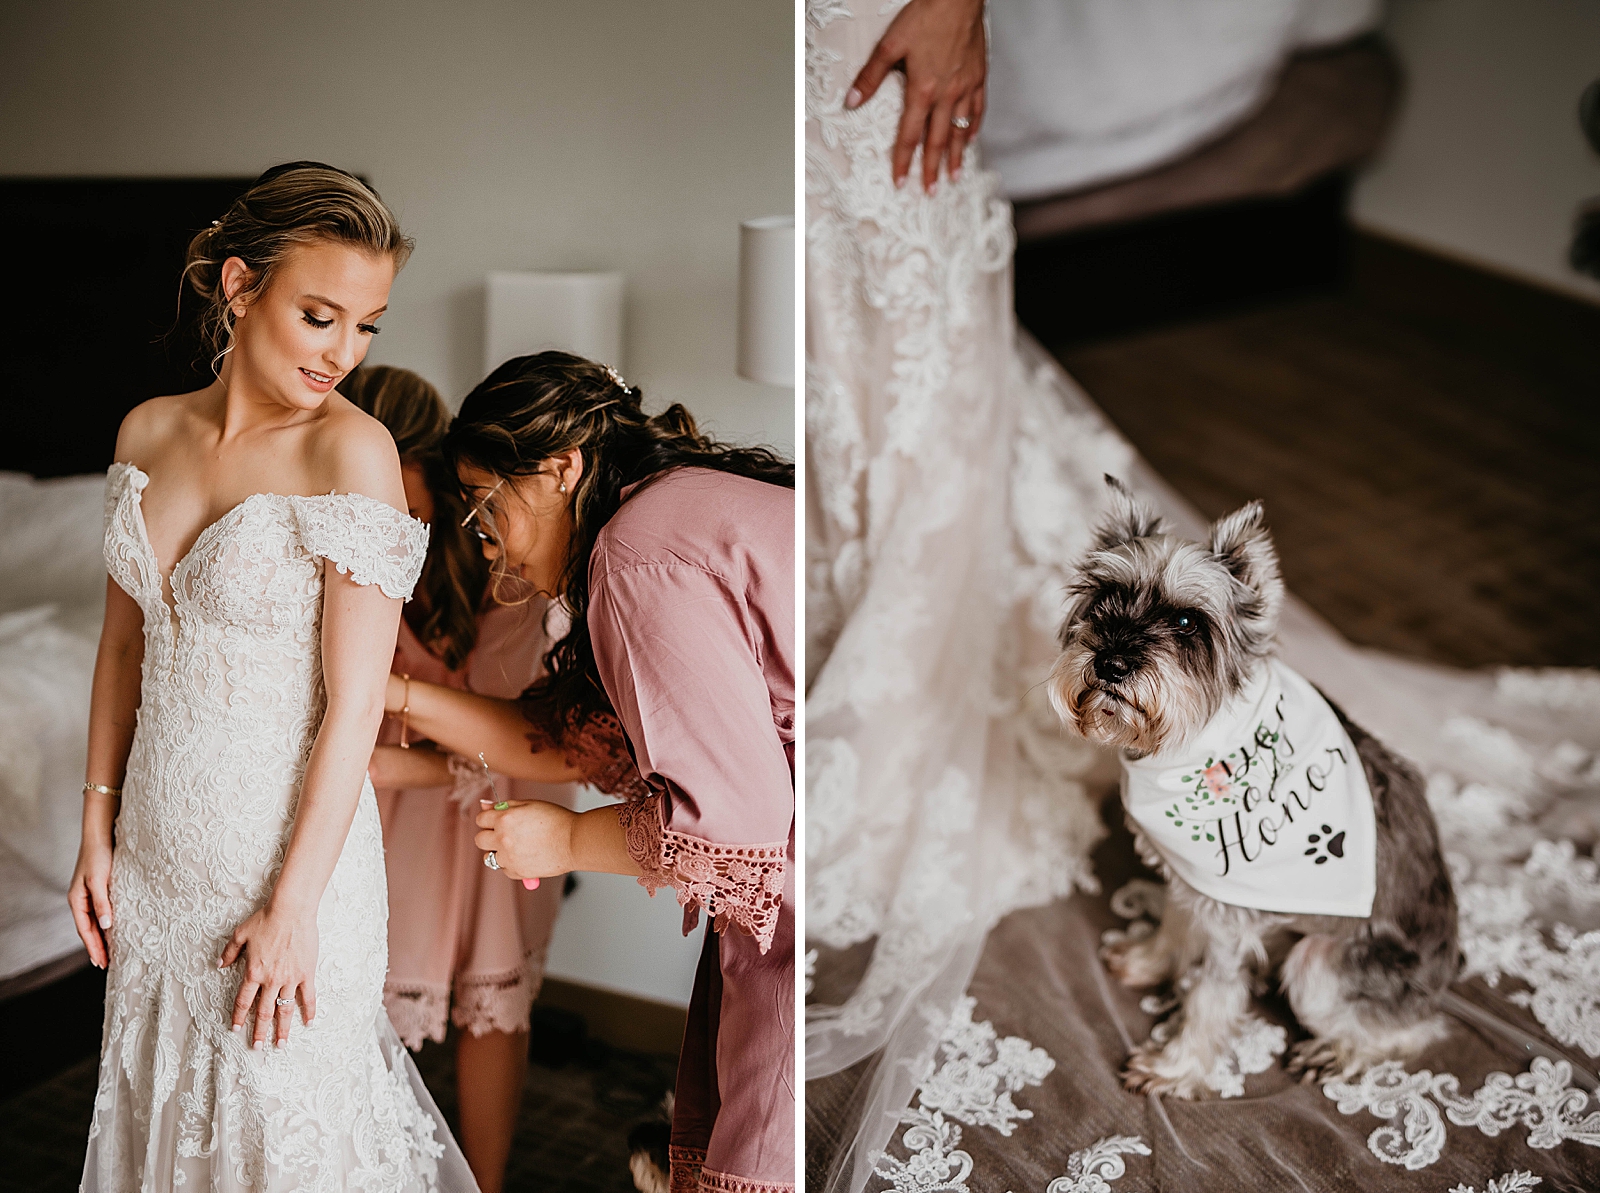 Bride getting help with dress and dog in wedding garment